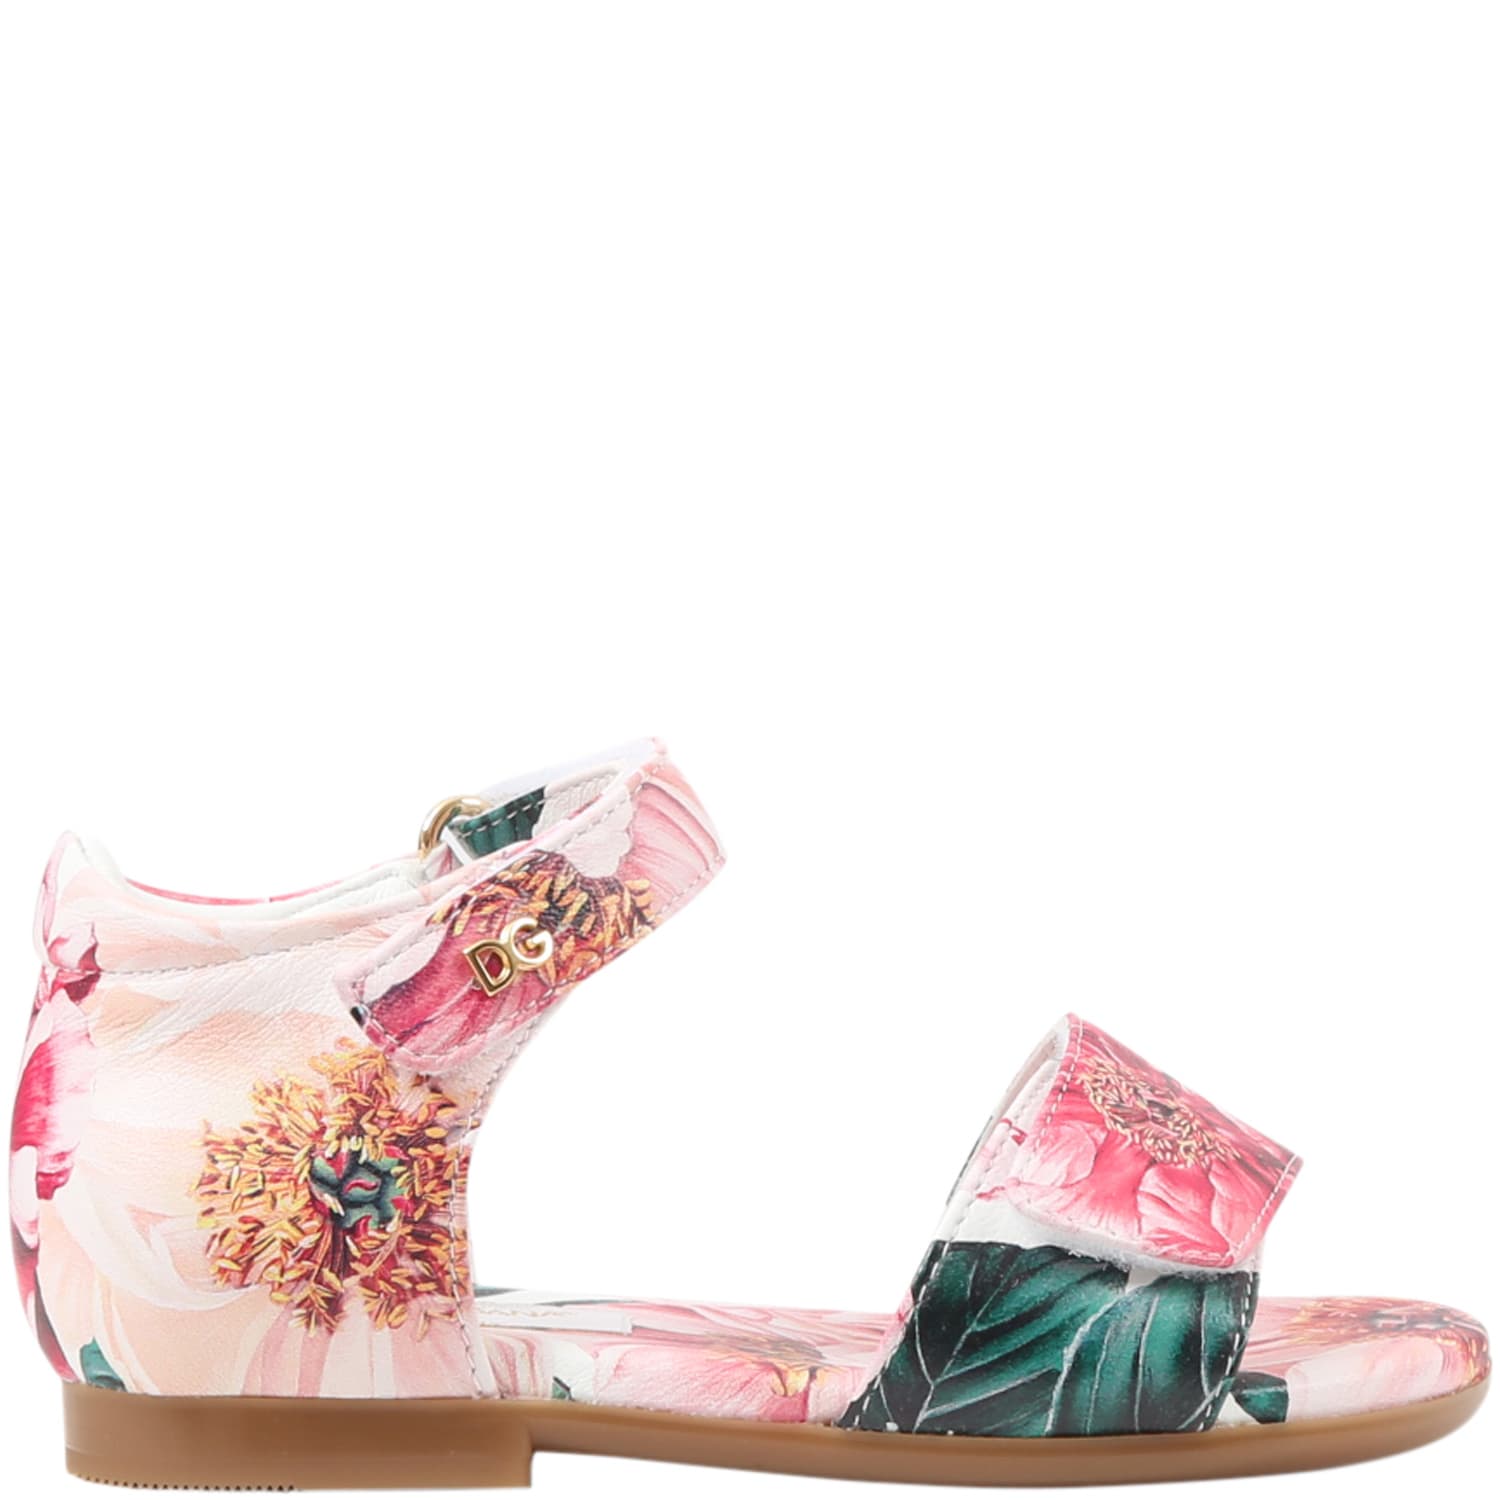 Buy Dolce & Gabbana Multicolor Sandals For Girl With Camellias online, shop Dolce & Gabbana shoes with free shipping